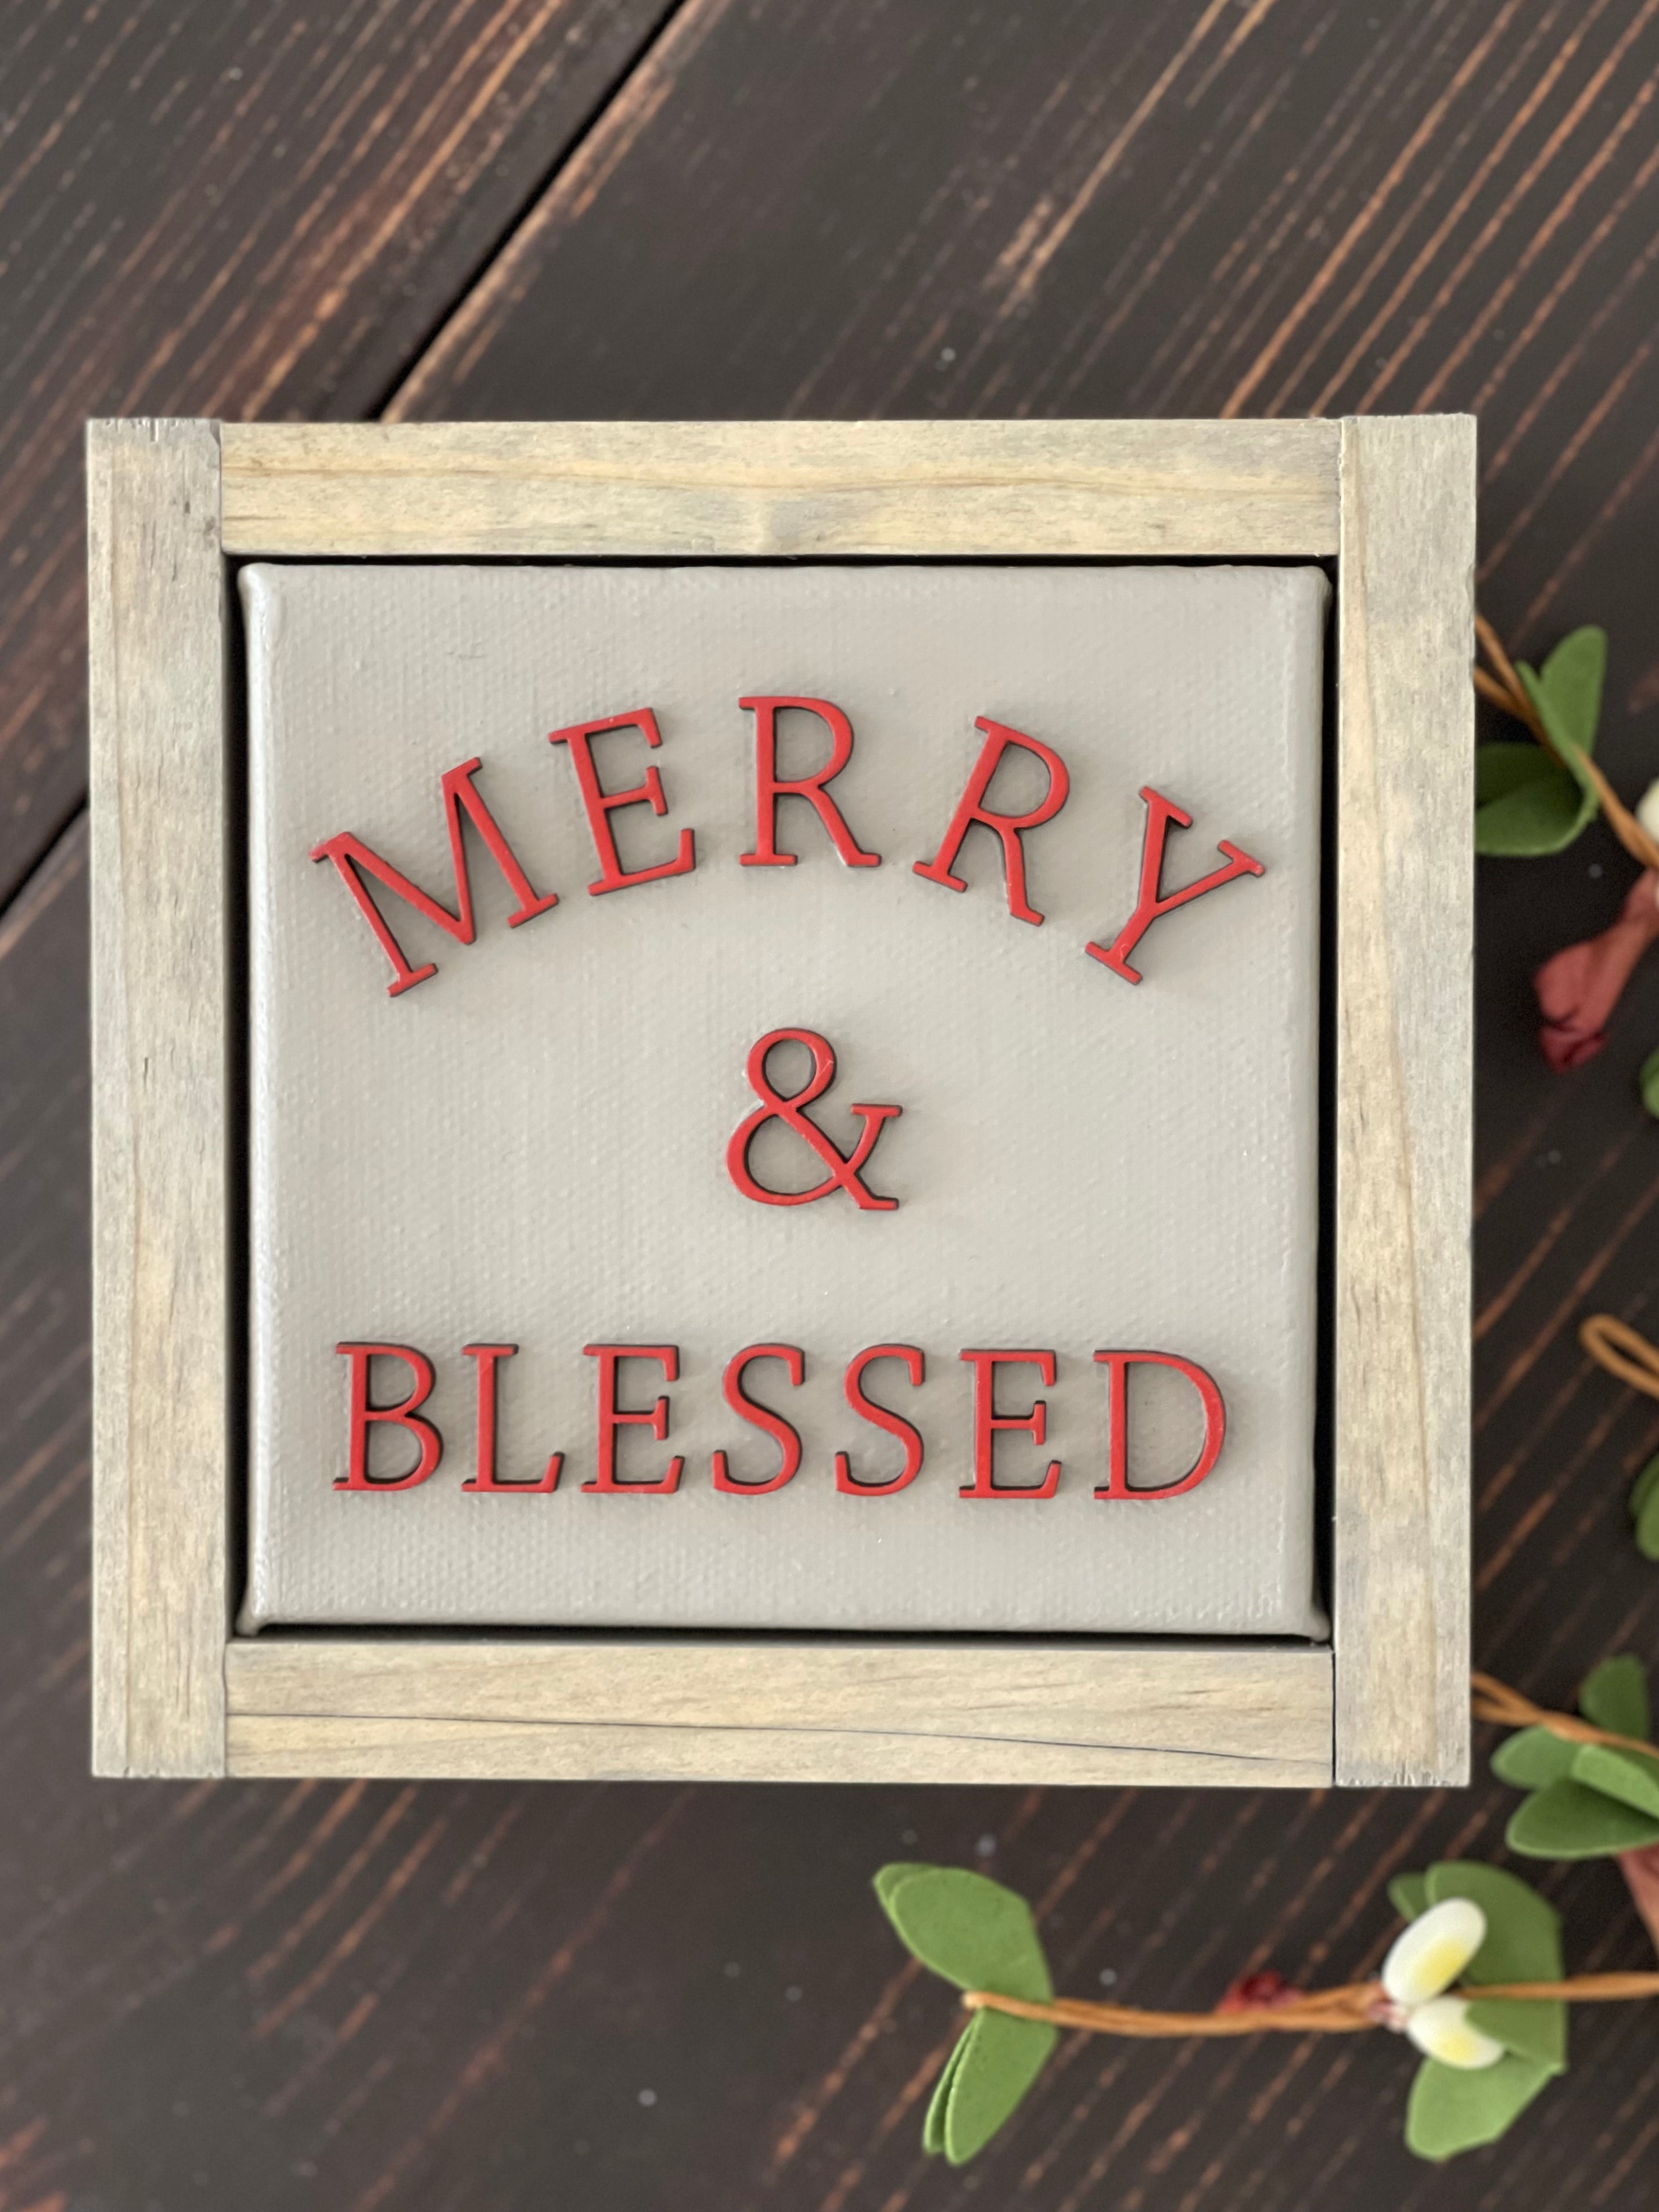 Merry + blessed is displayed on a bench with greenery.